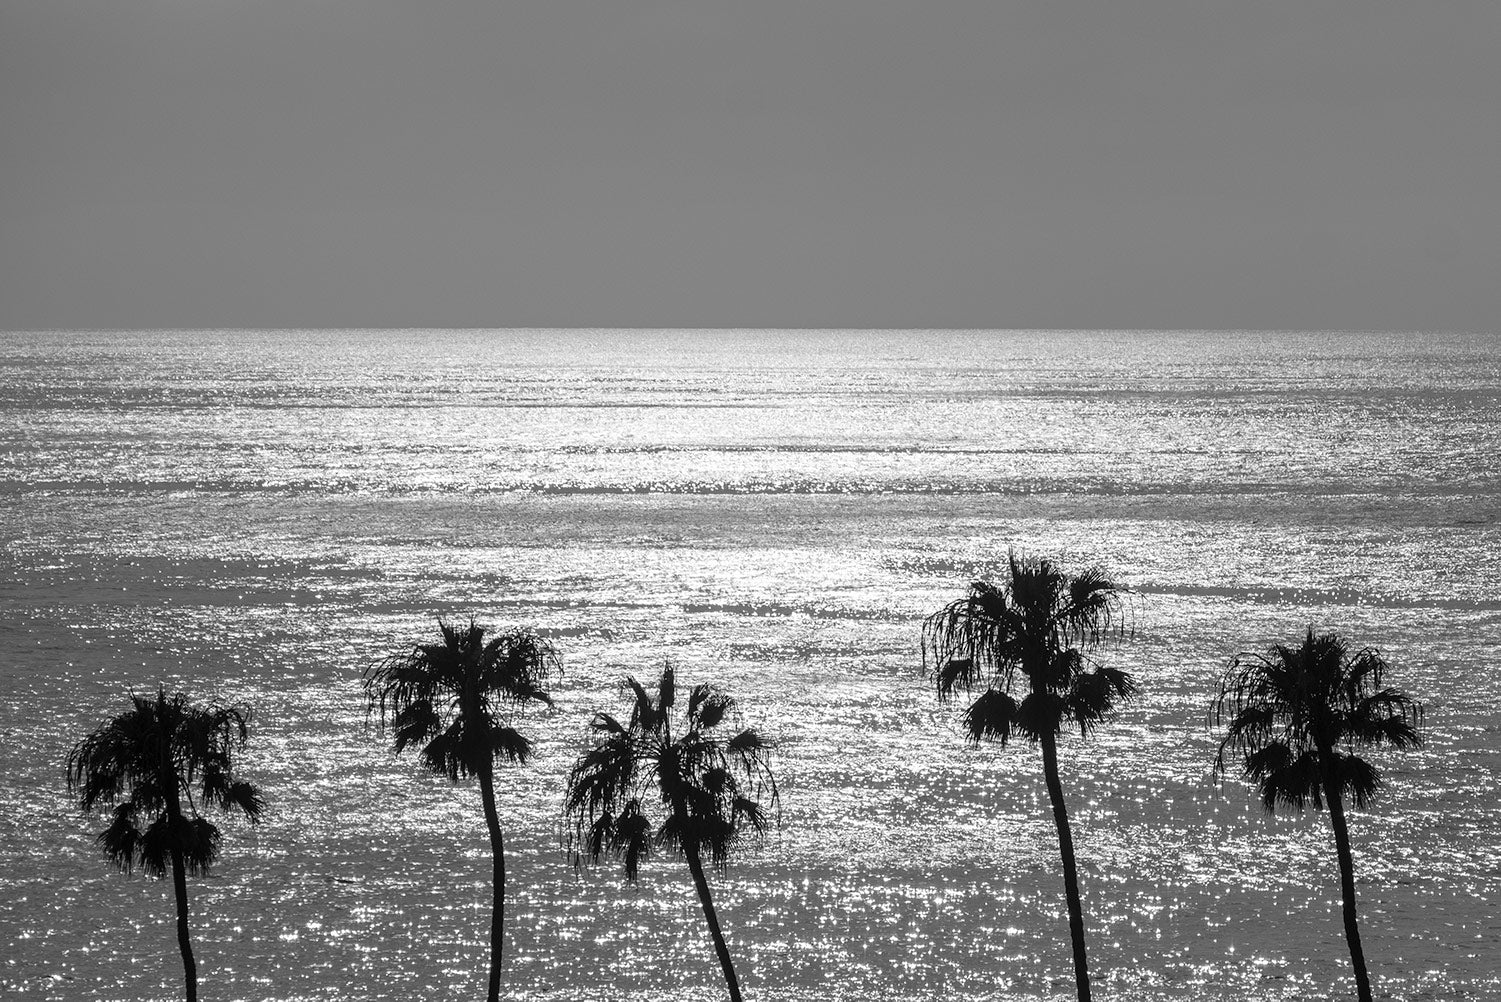 A silhouette monochrome of five palm trees in front of a sunlit sea at La Jolla, San Diego, California.